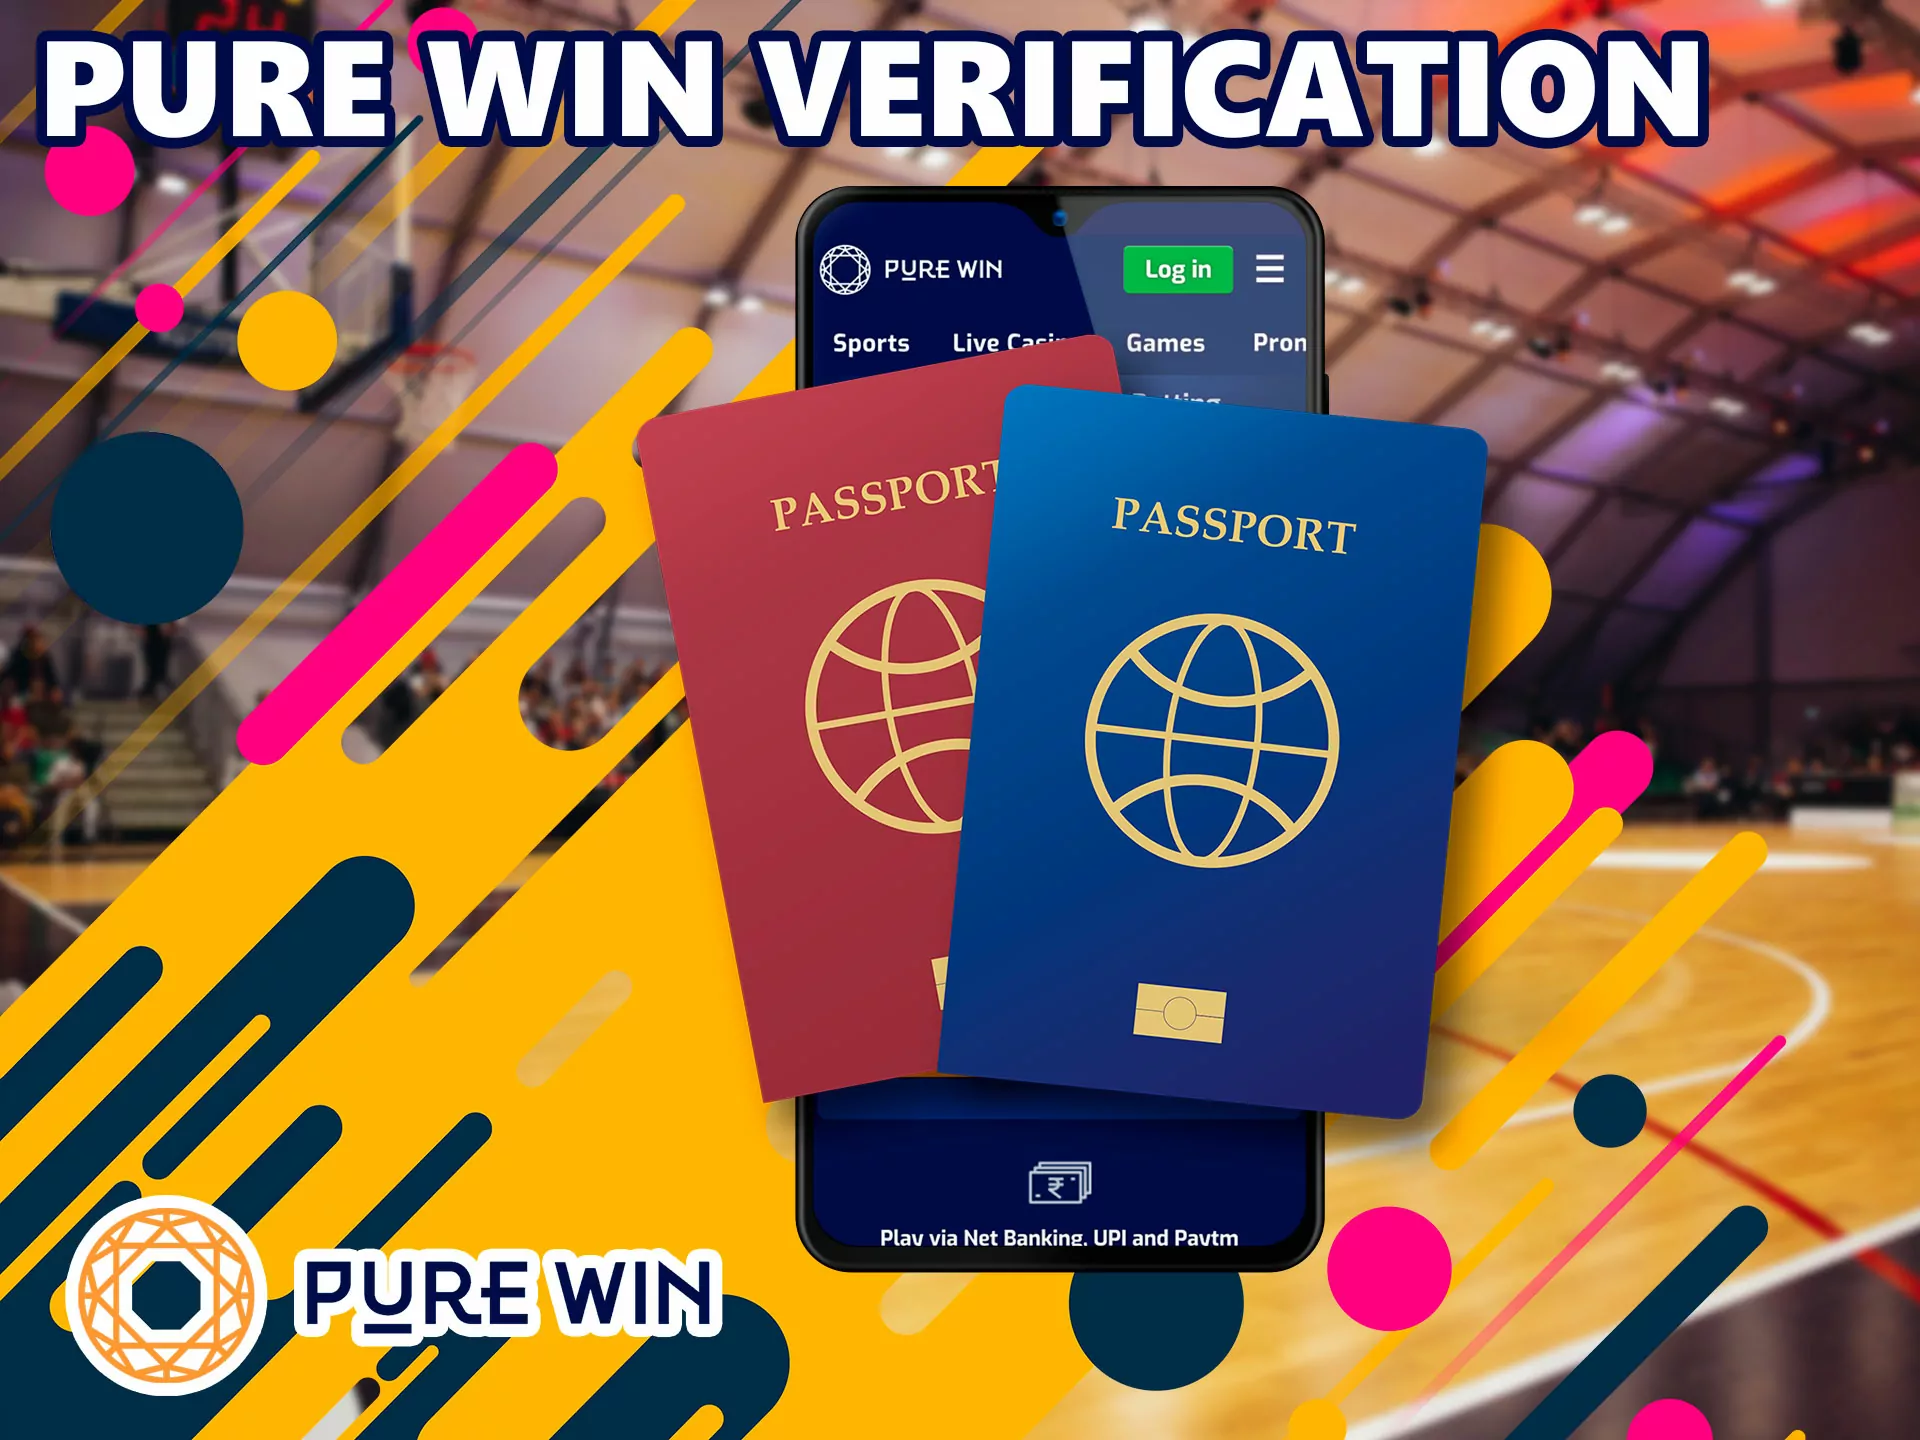 Go through this simple standard operation to be able to withdraw money from Pure Win.